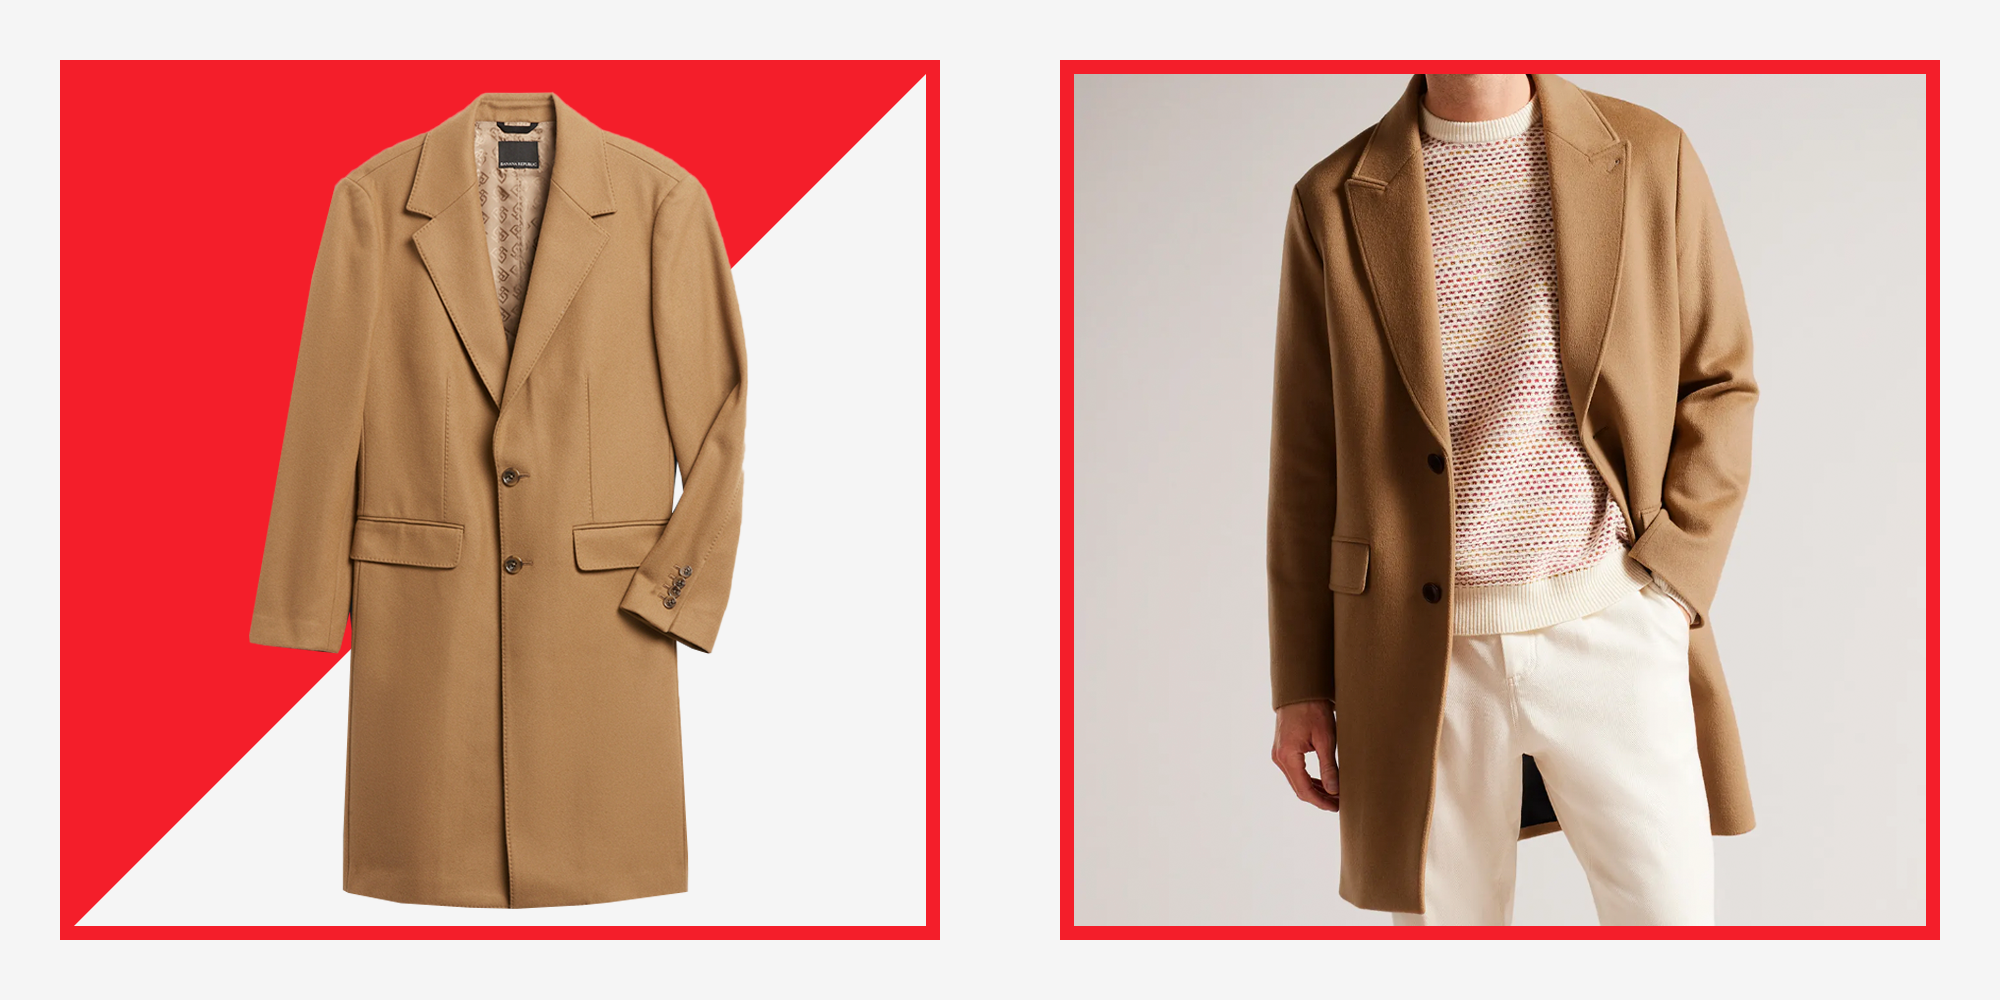 Articles of Style Camel Hair Topcoat Camel